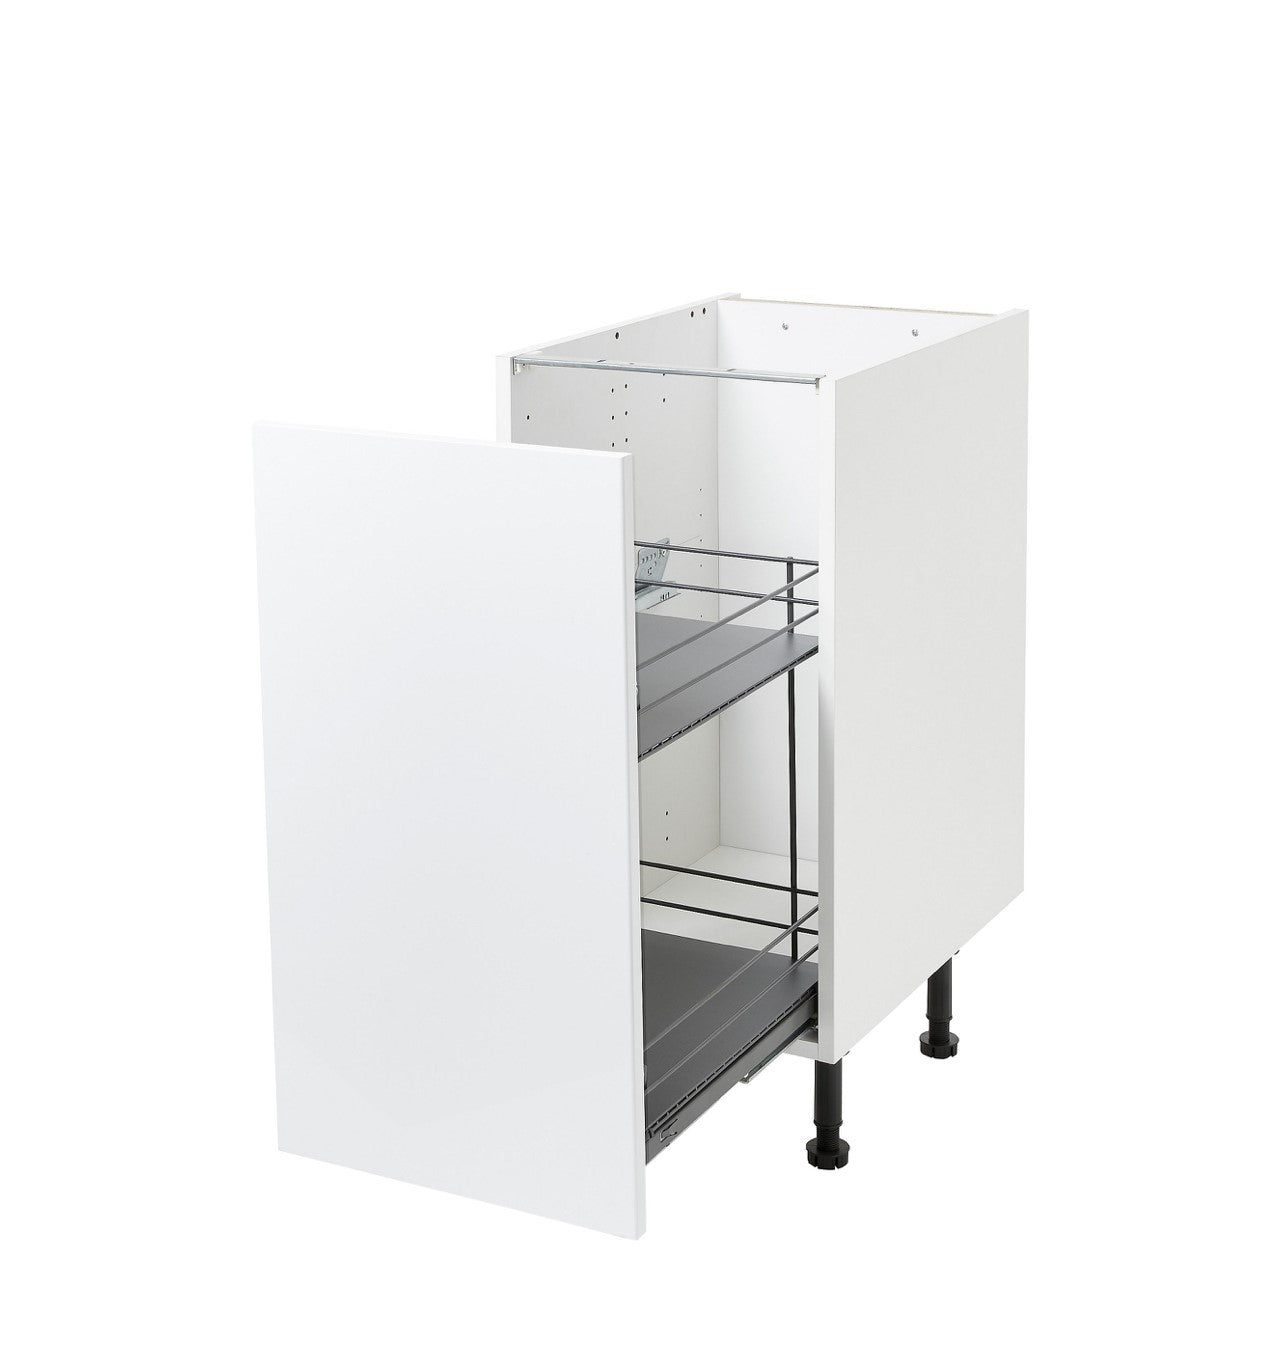 GoodHome Pebre Pull-out storage, Soft close runners (W)400mm (R28)